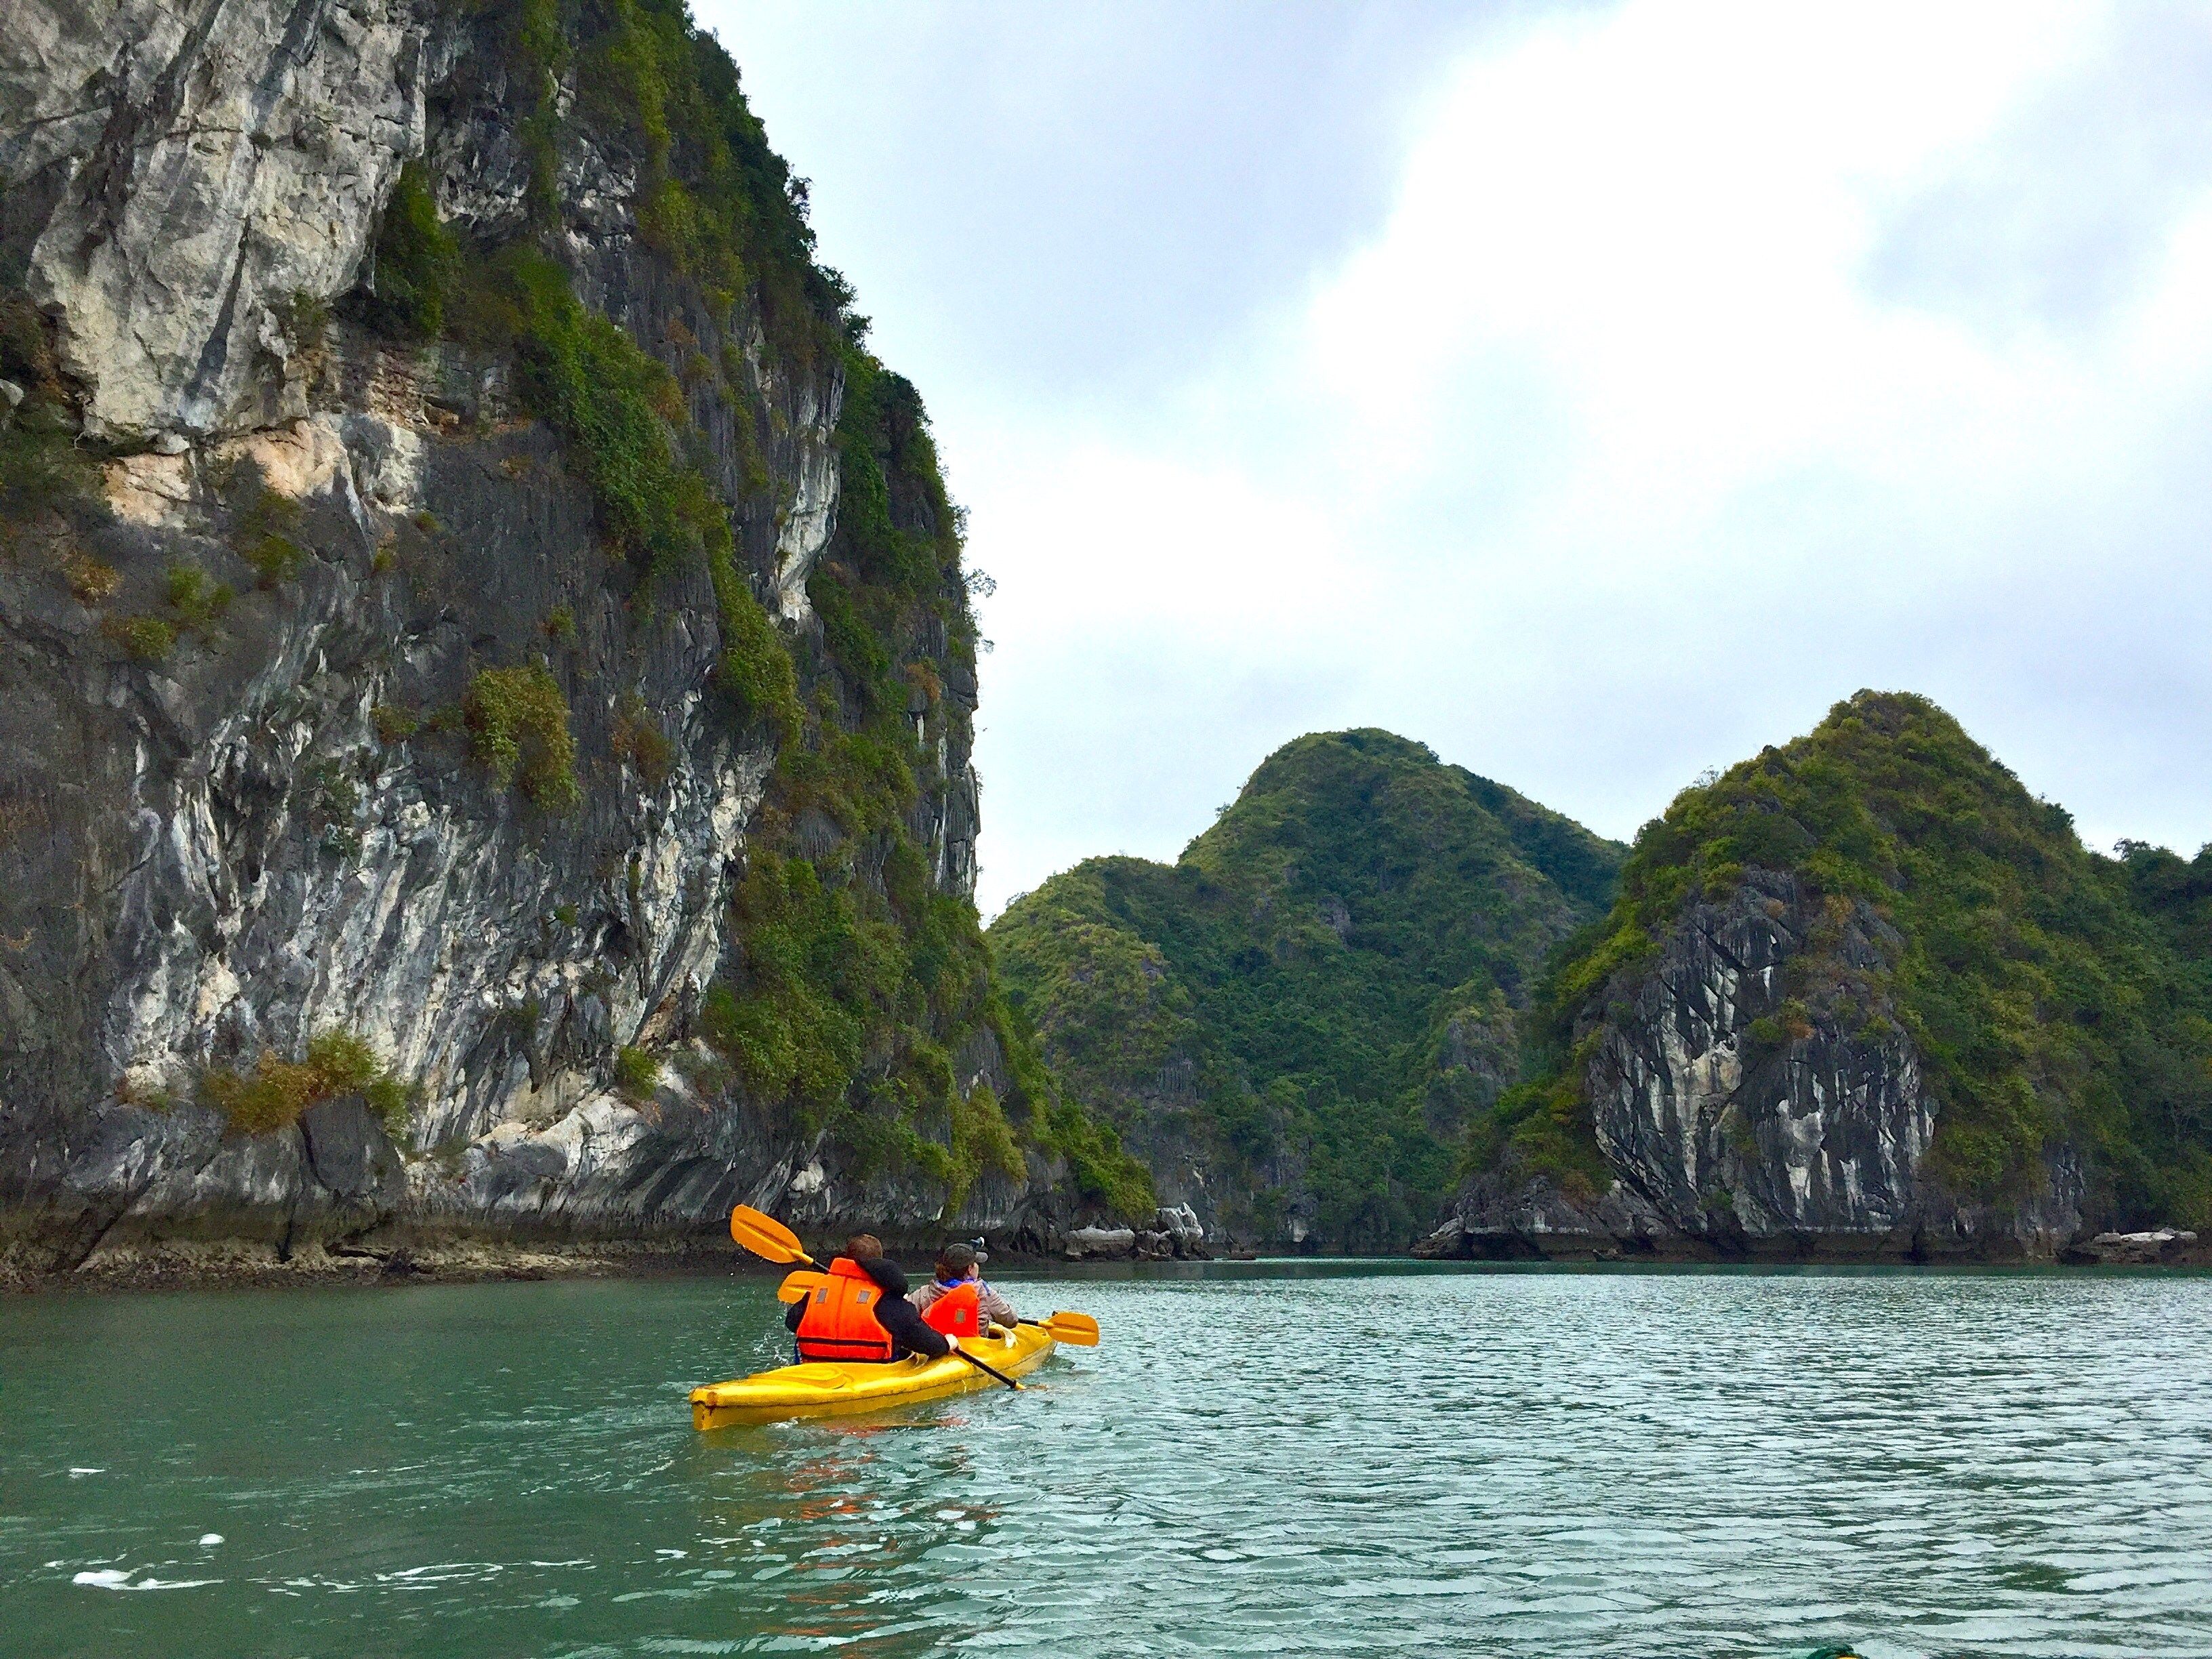 Kayakers off Tam Coc shore